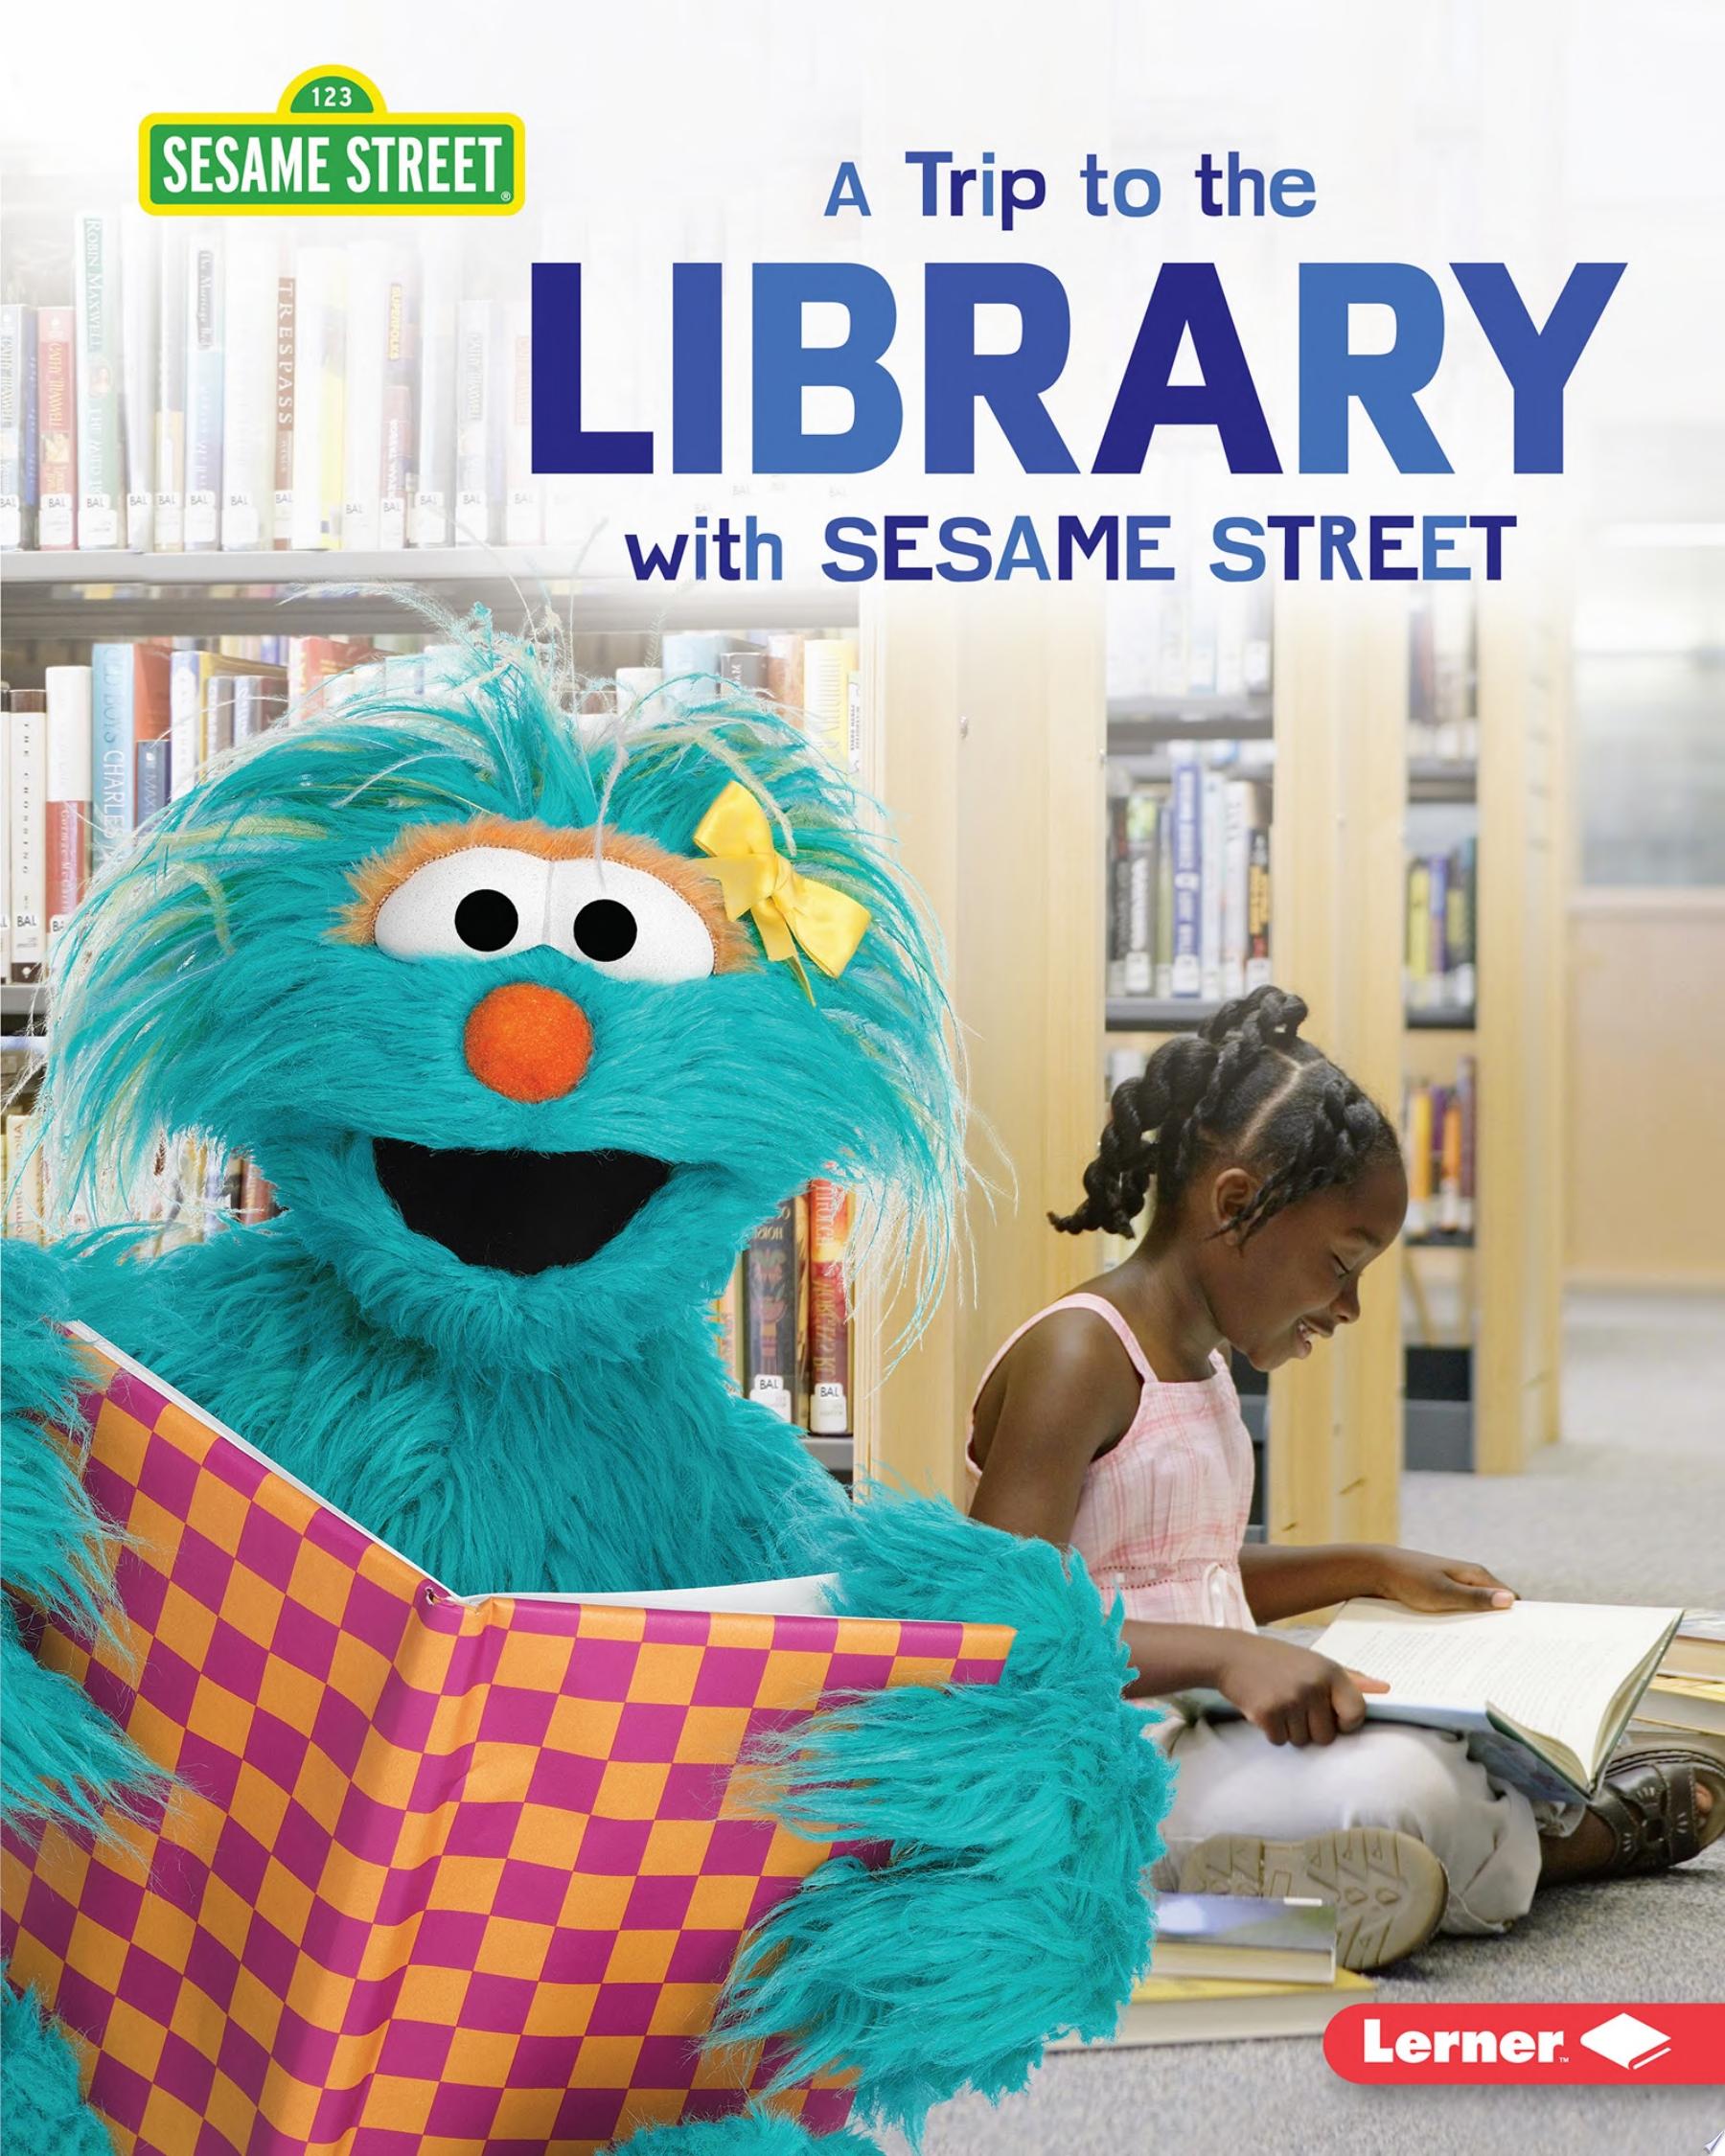 Image for "A Trip to the Library with Sesame Street ®"